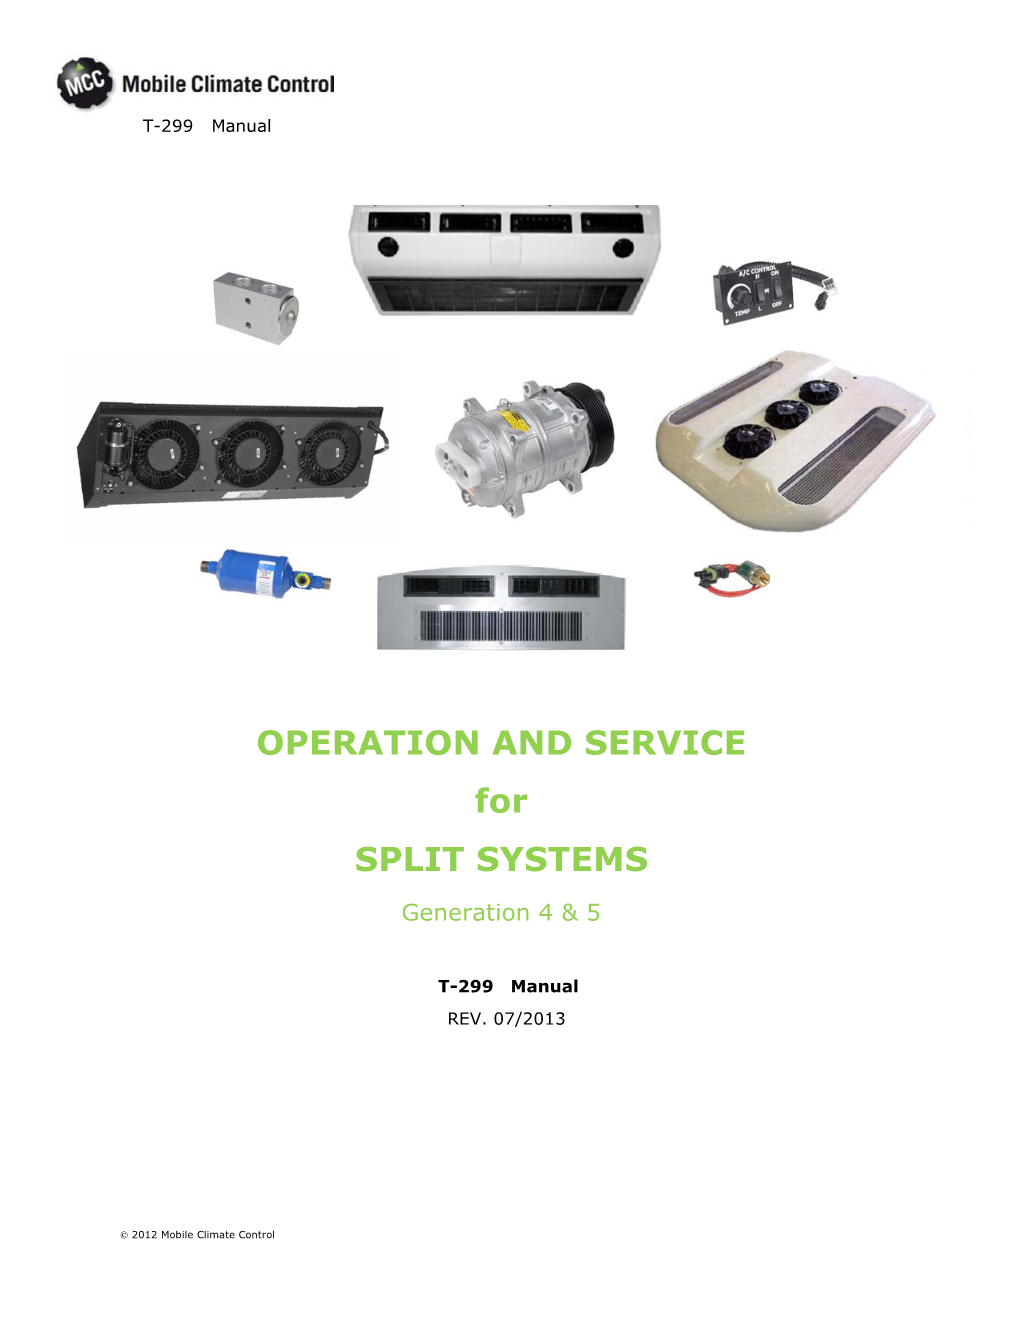 OPERATION and SERVICE for SPLIT SYSTEMS